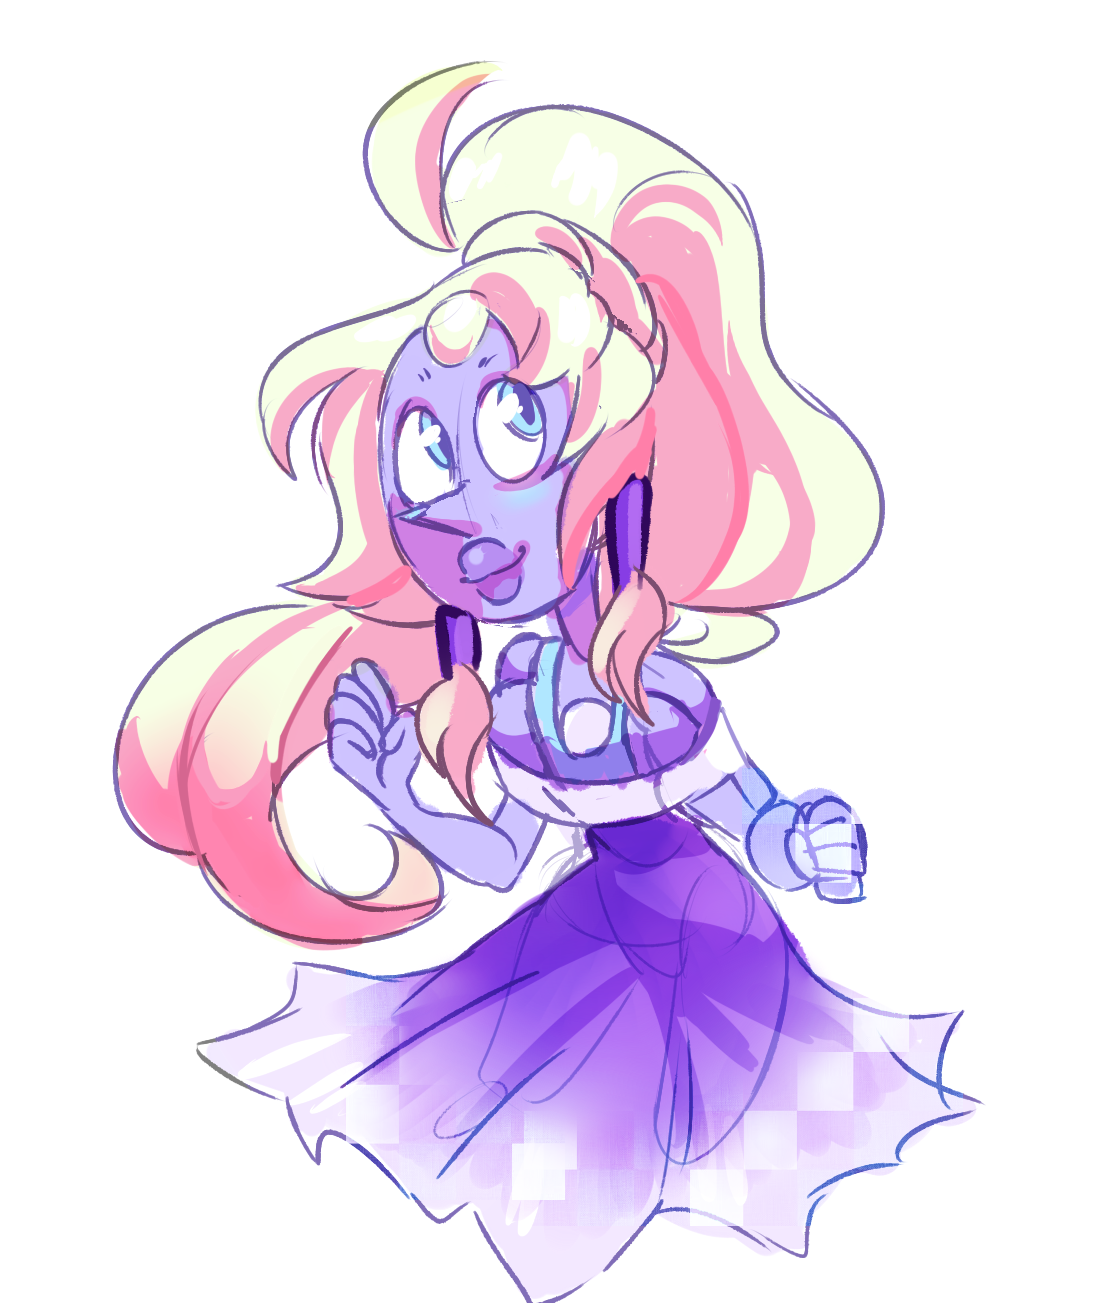 pearl 6 ame 6 for anon
hopefully i didnt misread that